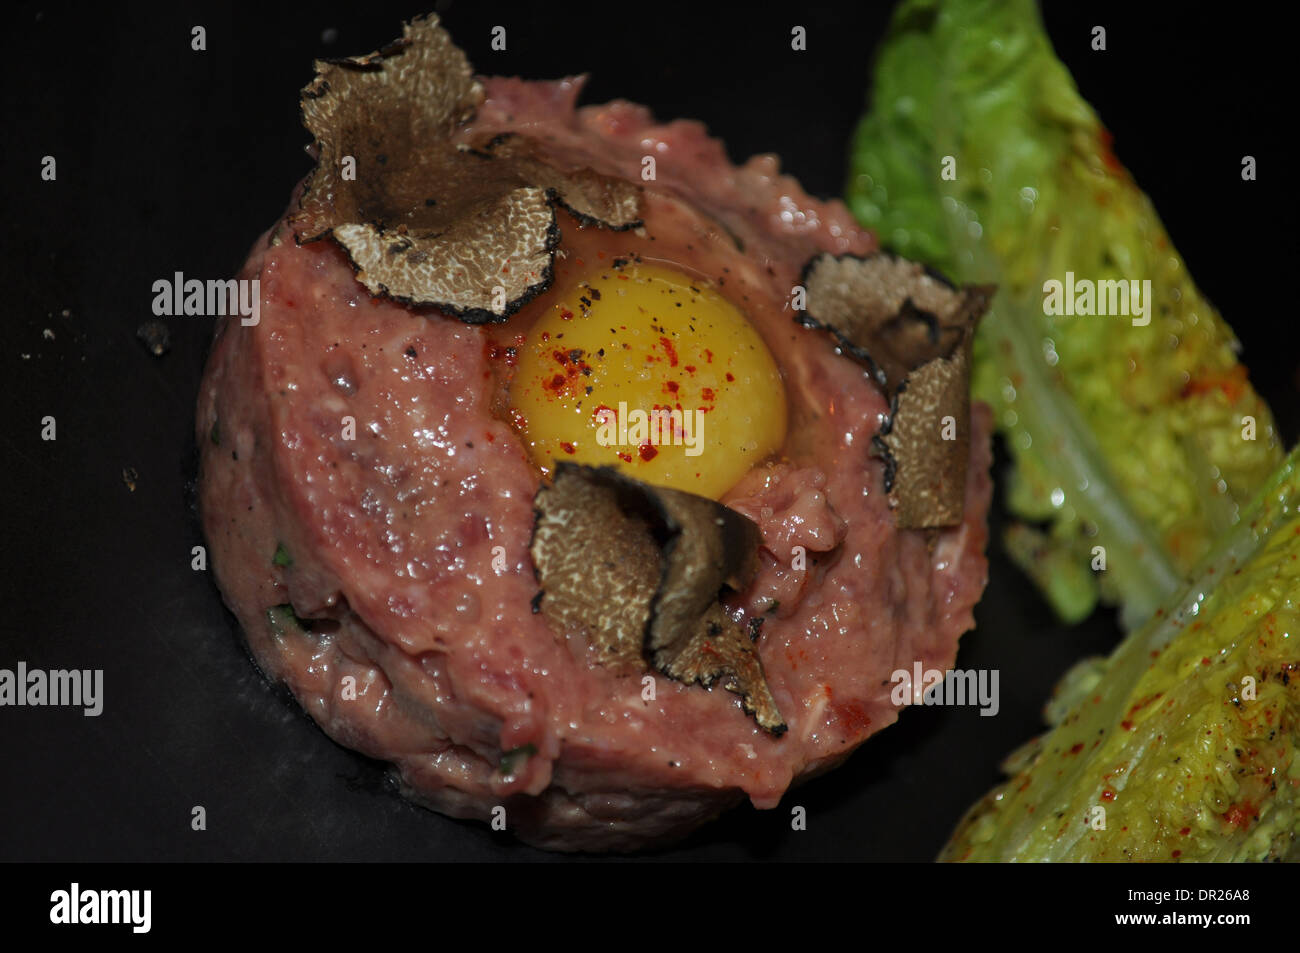 Steak tartare with shaved truffle served at a Michelin starred restaurant in London served on black slate Stock Photo